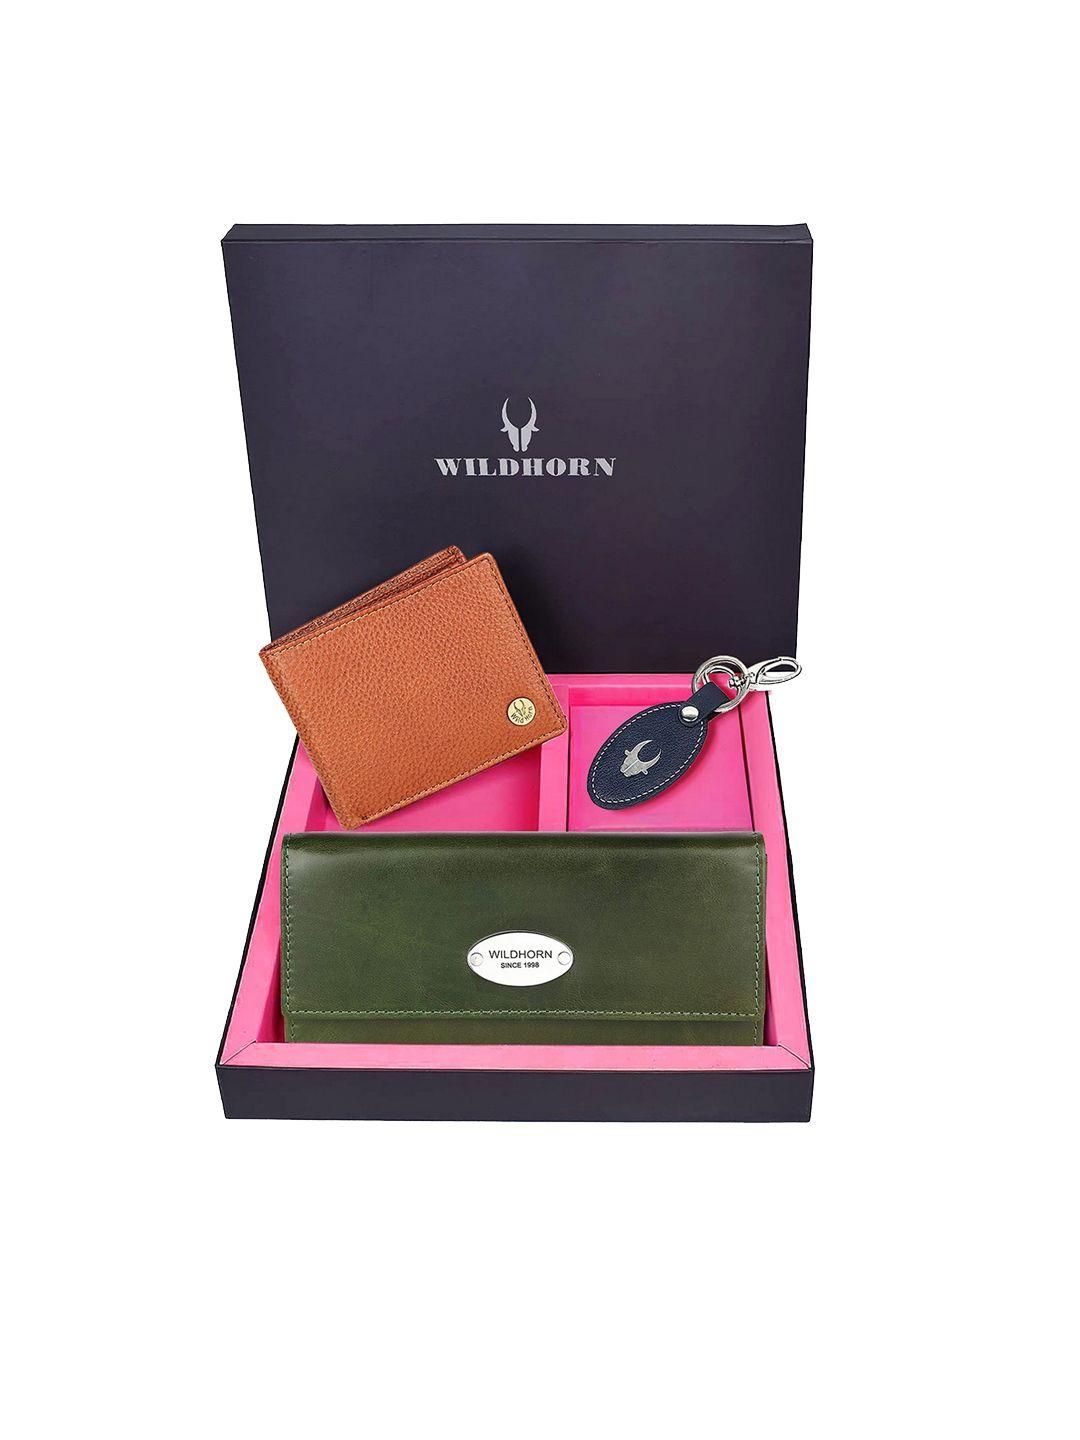 wildhorn unisex tan-brown & green solid premium leather accessory gift set